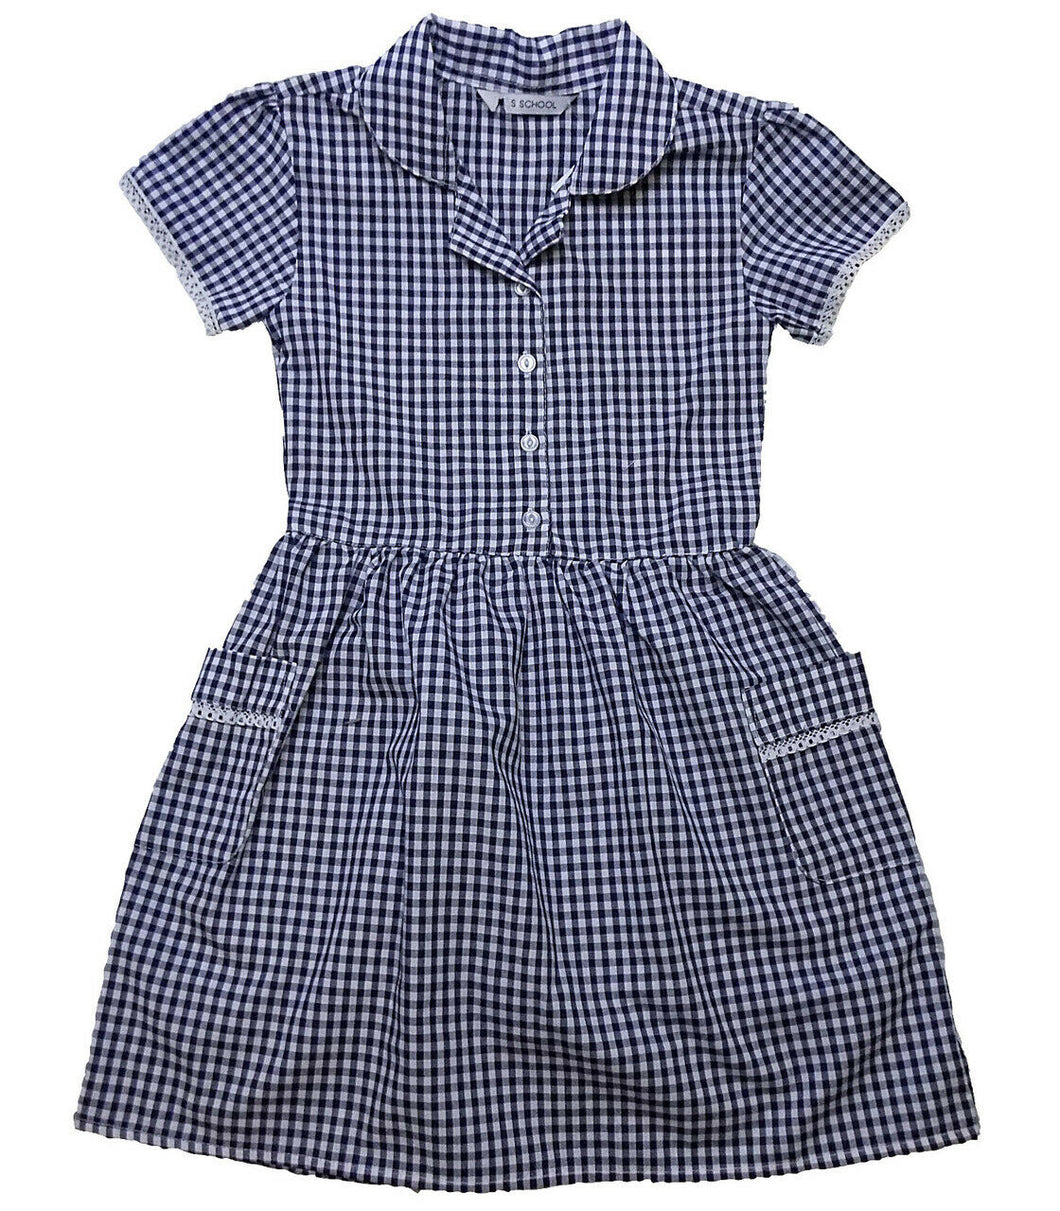 Navy Lace Trim Plain Collared Pocket Gingham